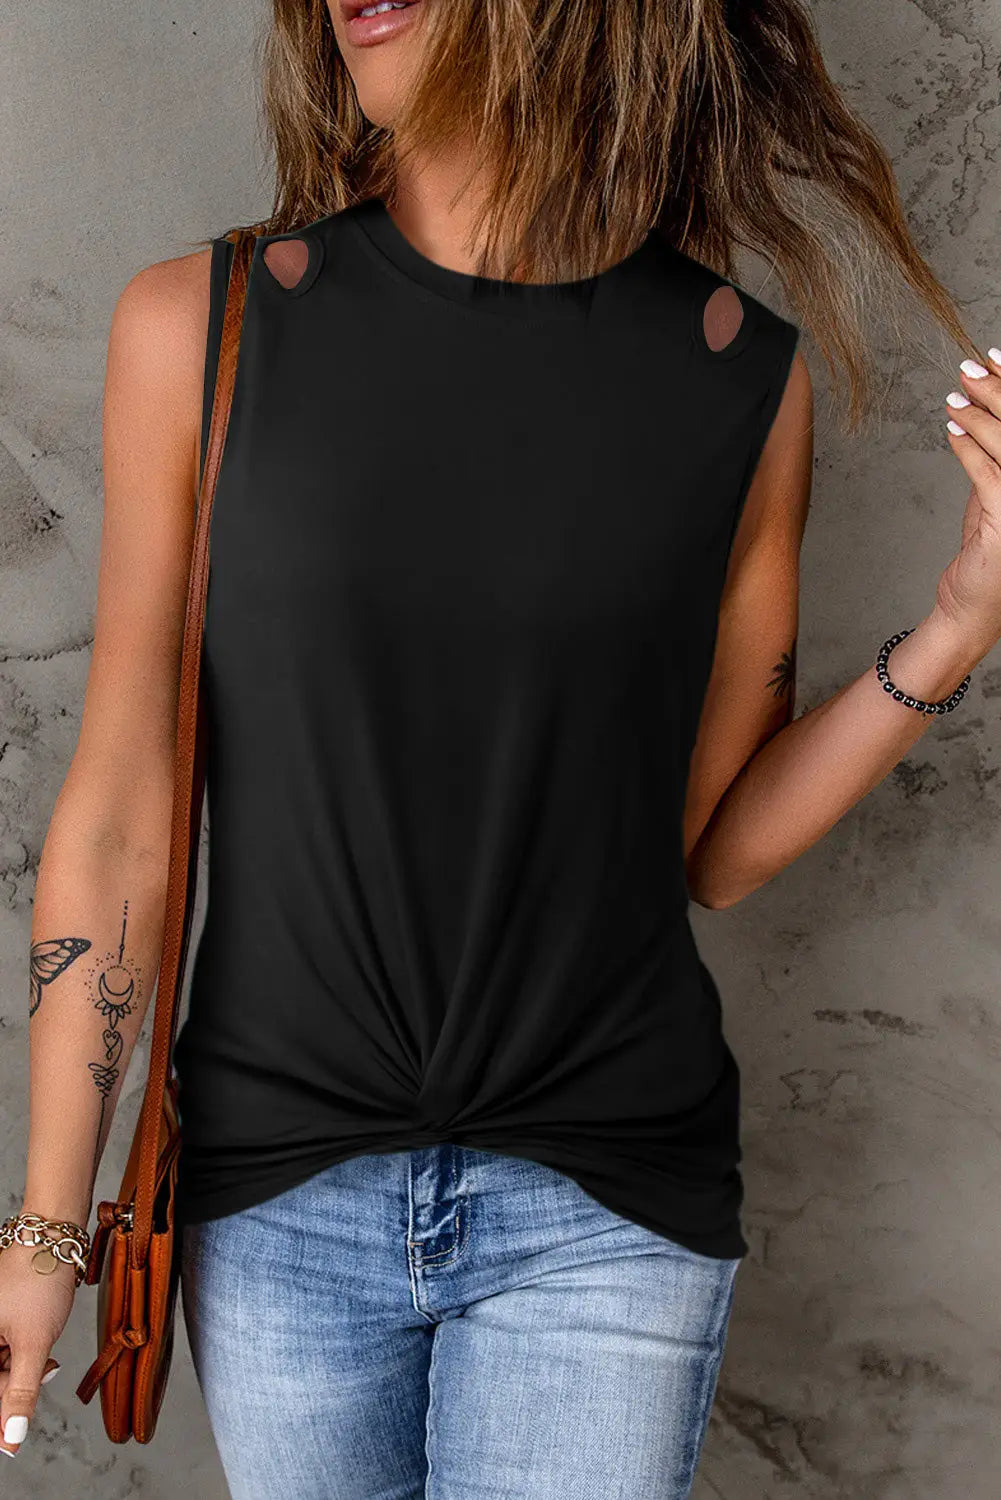 Black rib knit cut-out front twist tank top - s / 95% polyester + 5% elastane - tops